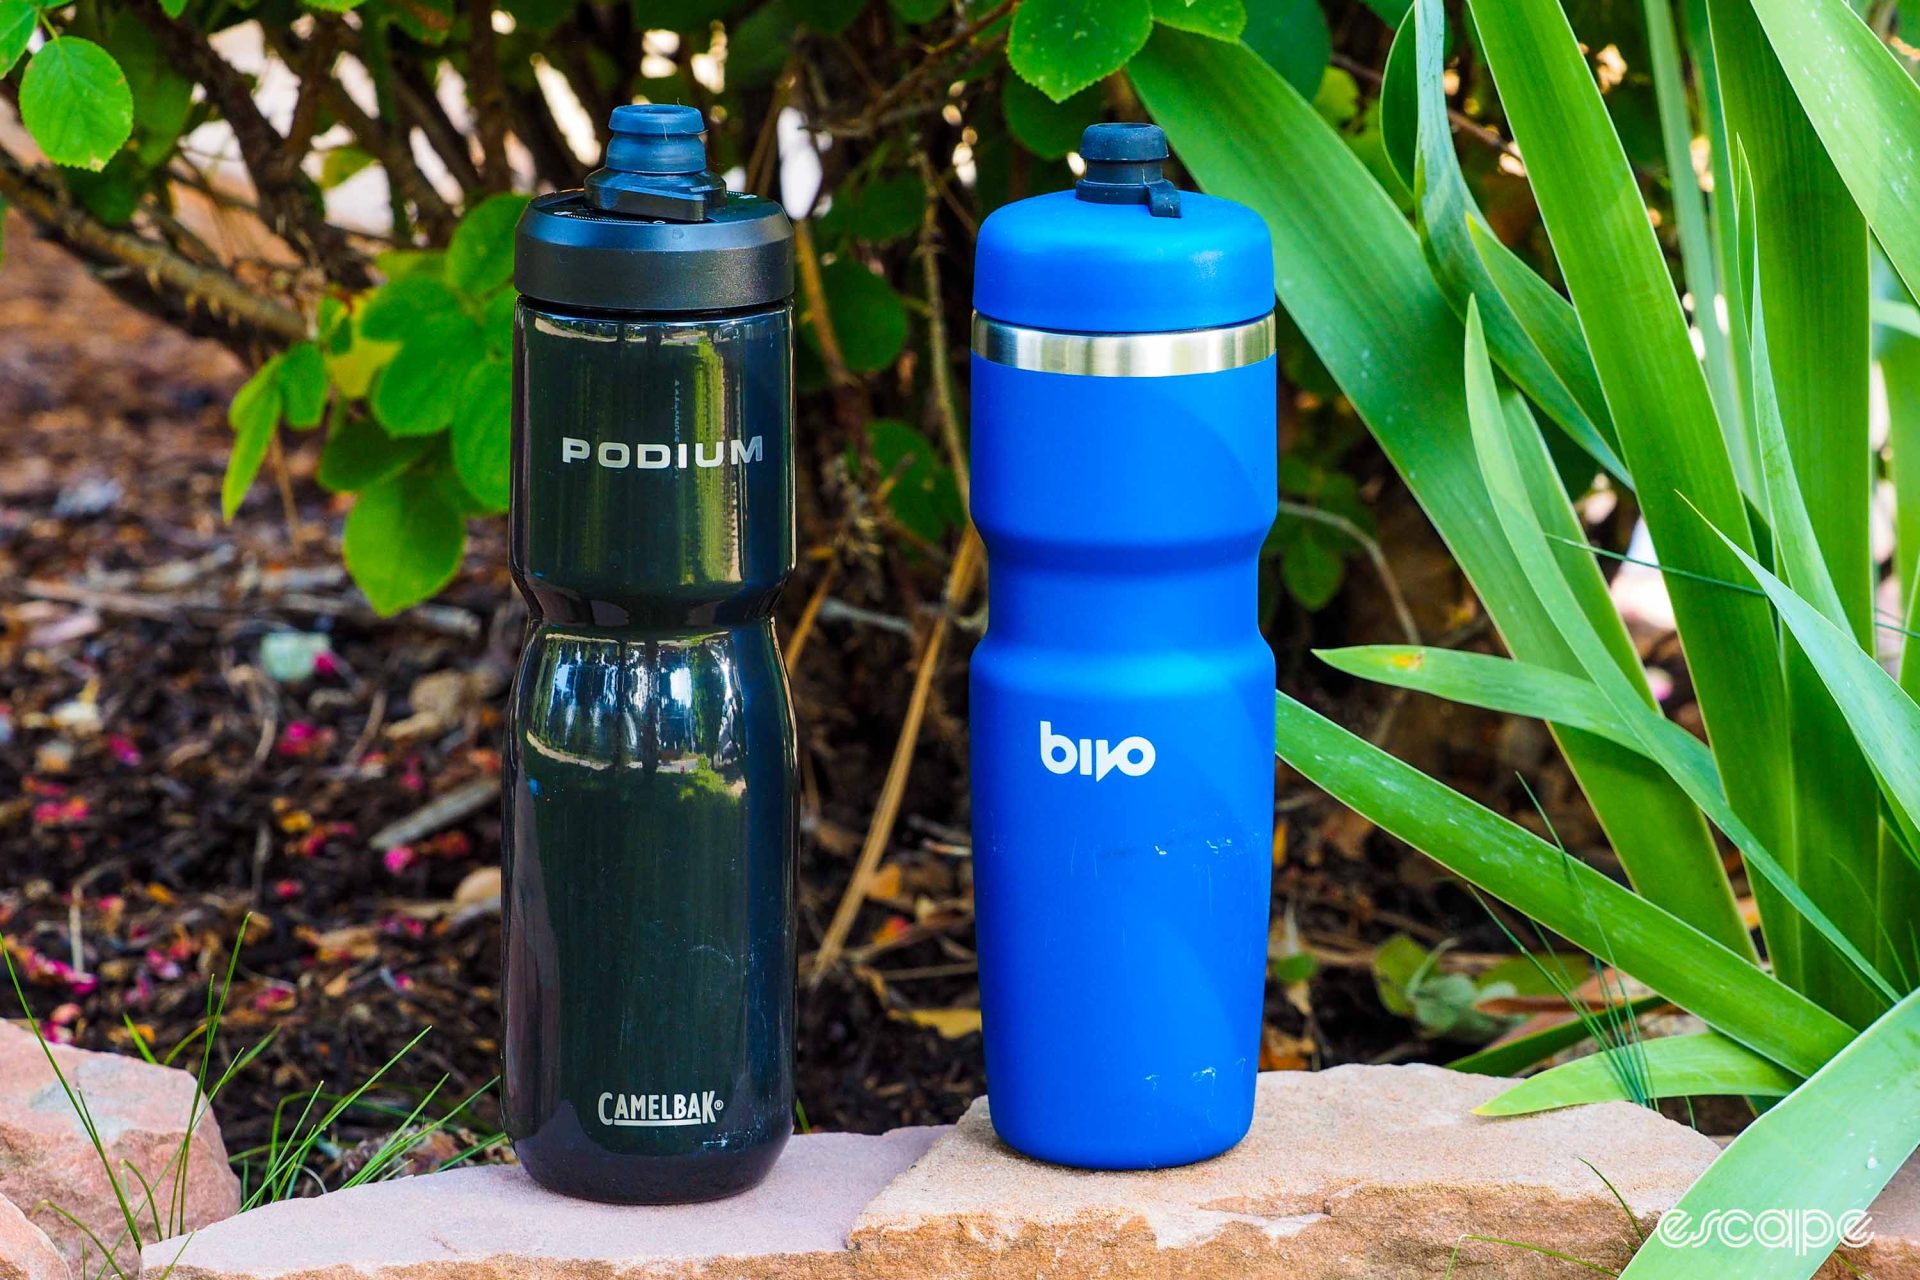 Large-sized insulated metal water bottles from CamelBak and Bivo